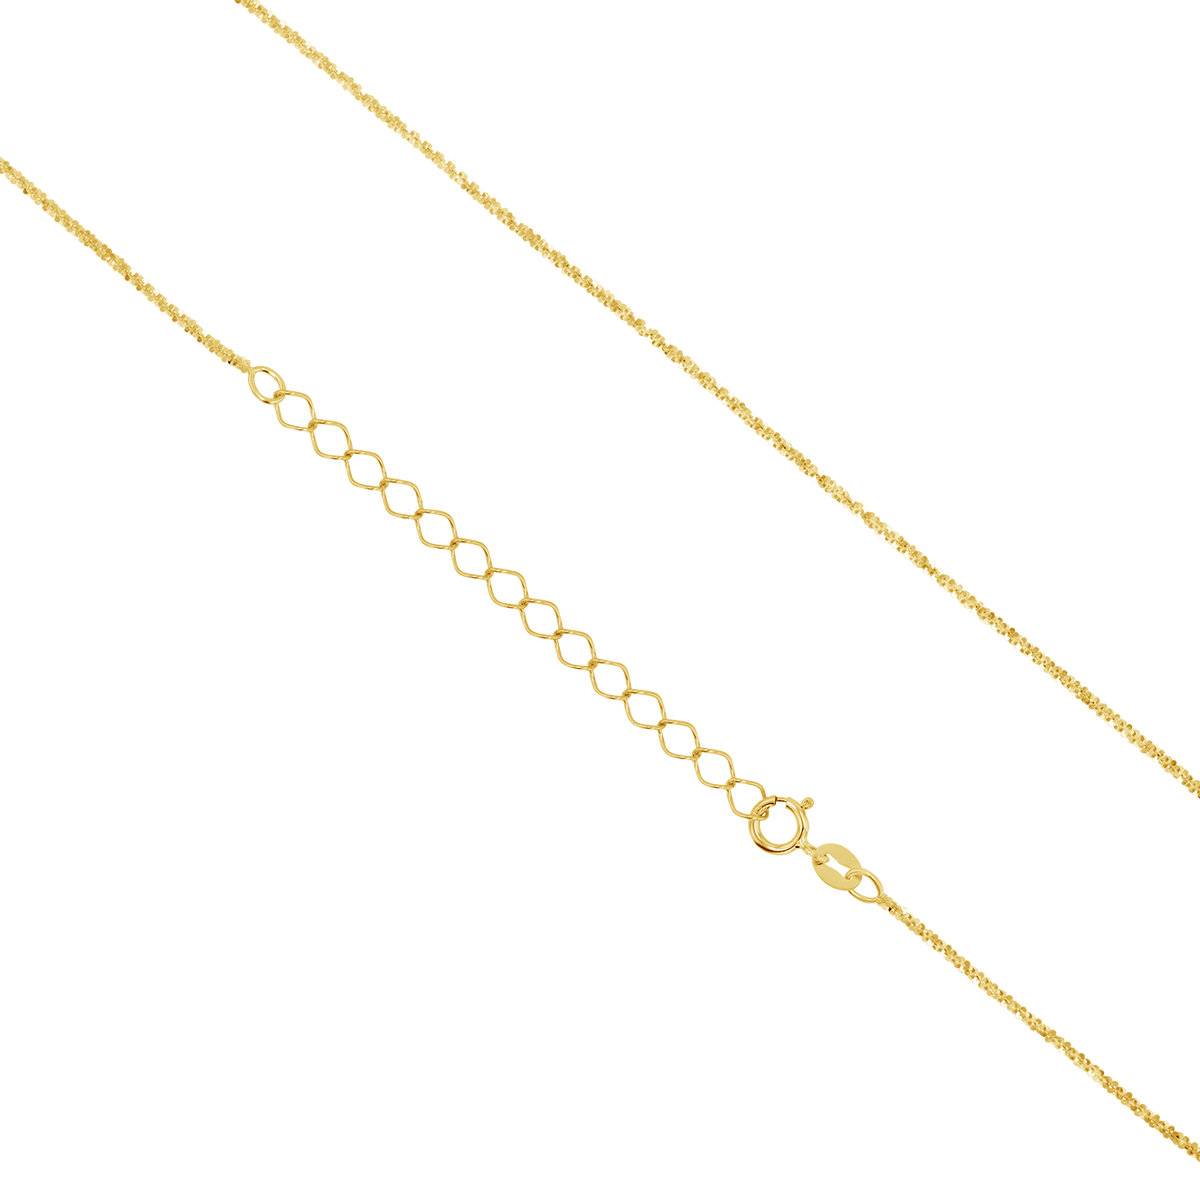 14K Gold Glimmer Chain Necklace – Baby Gold